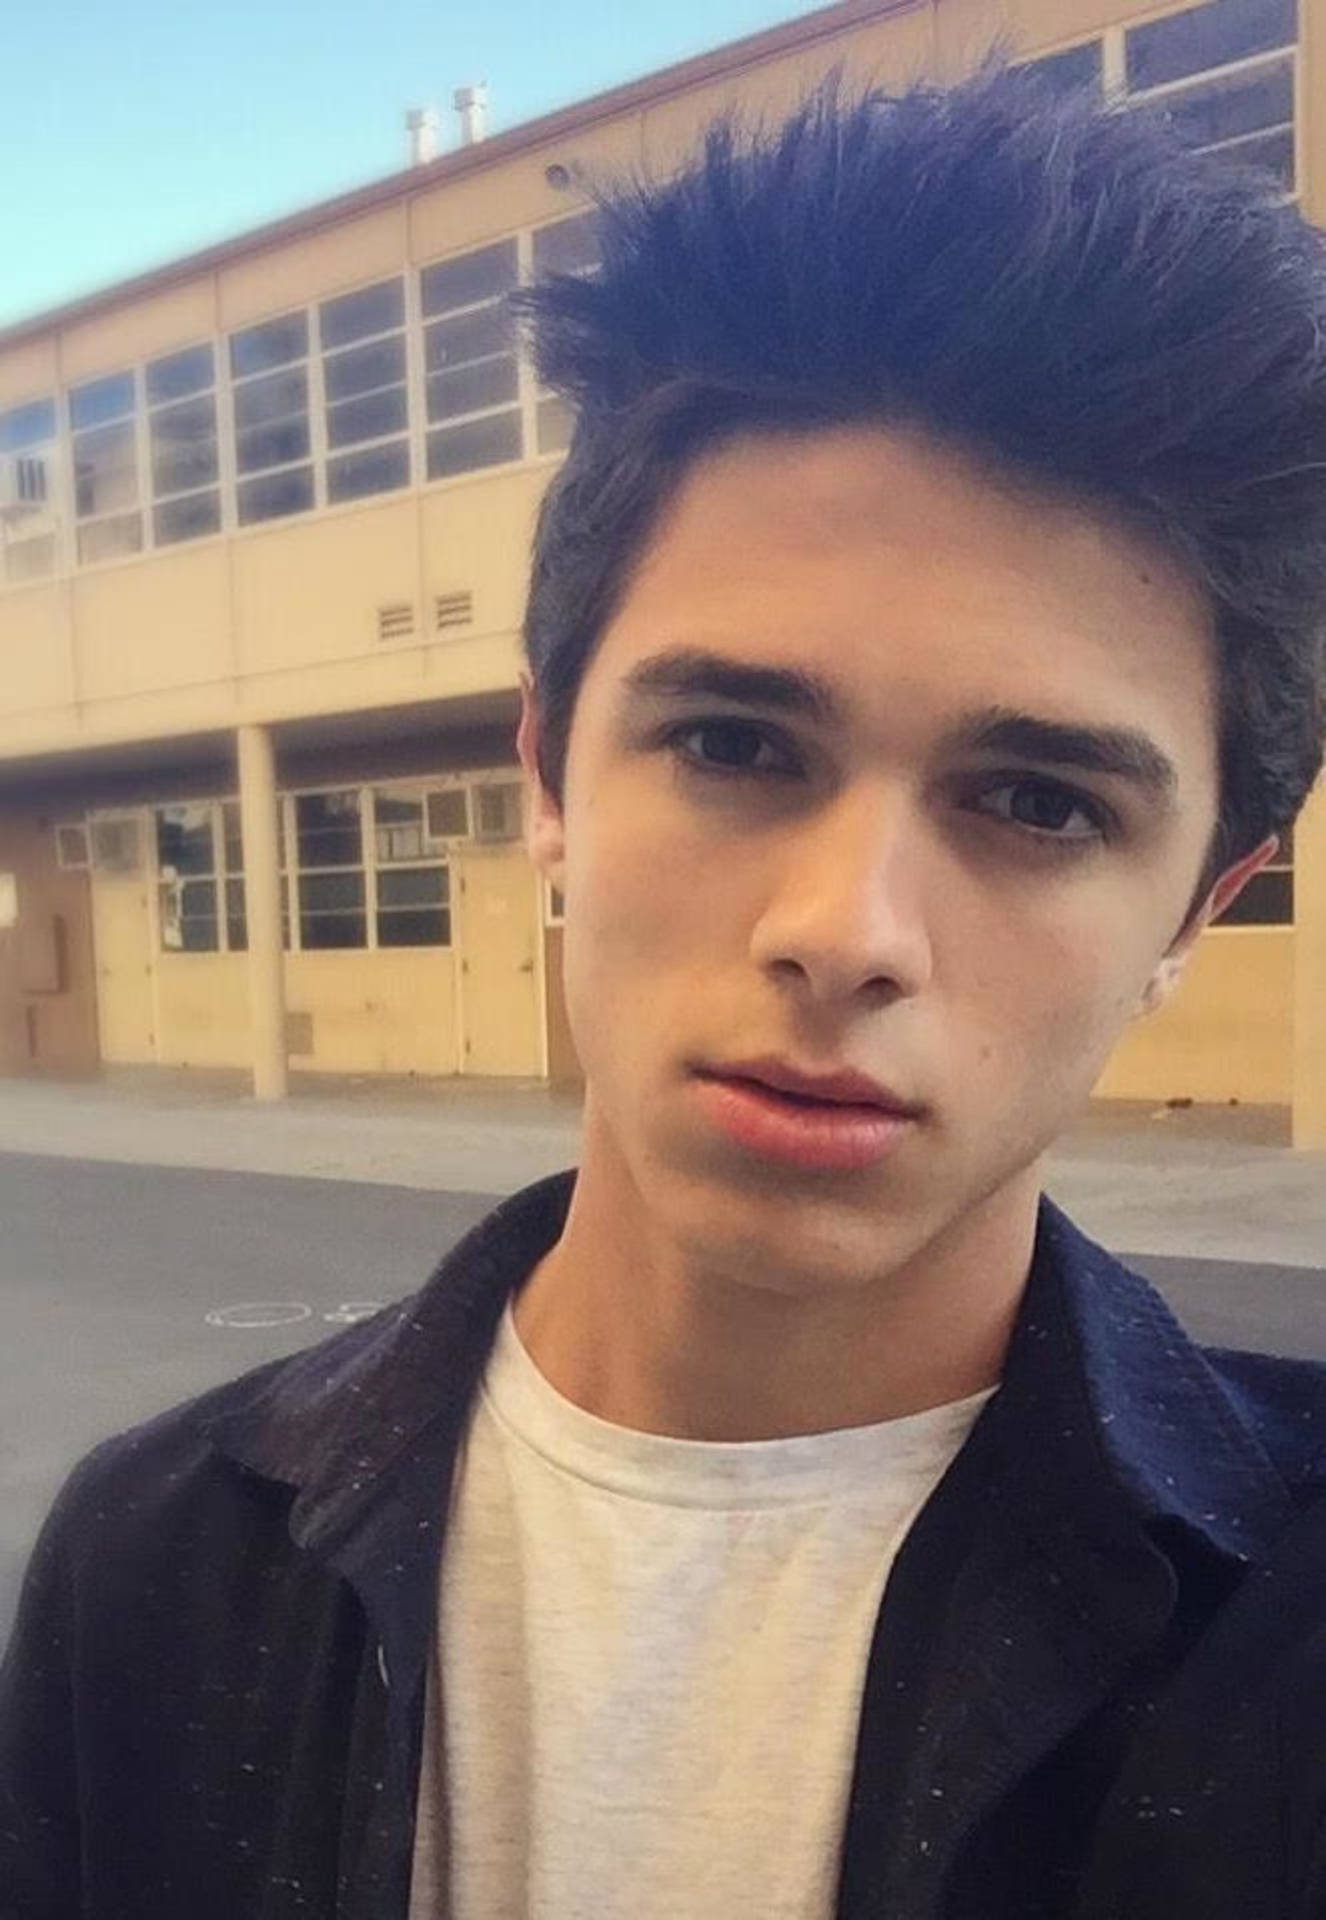 Vibrant photo of Brent Rivera leaning against a building. Wallpaper